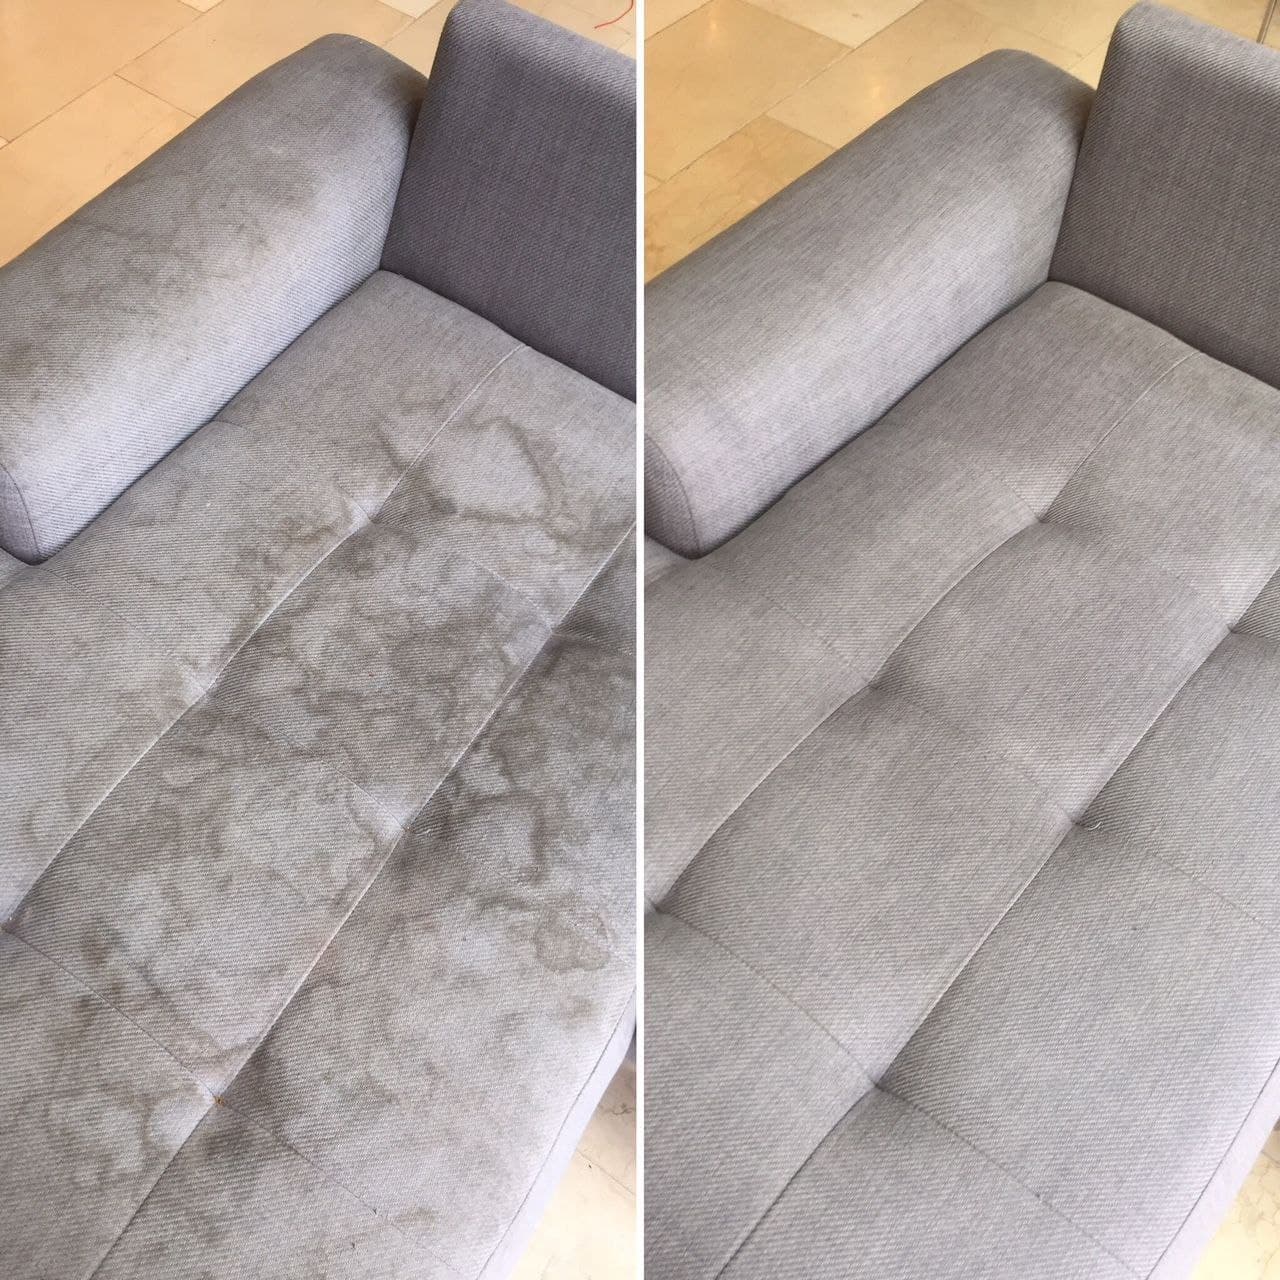 How to Clean The Upholstery of A Sofa